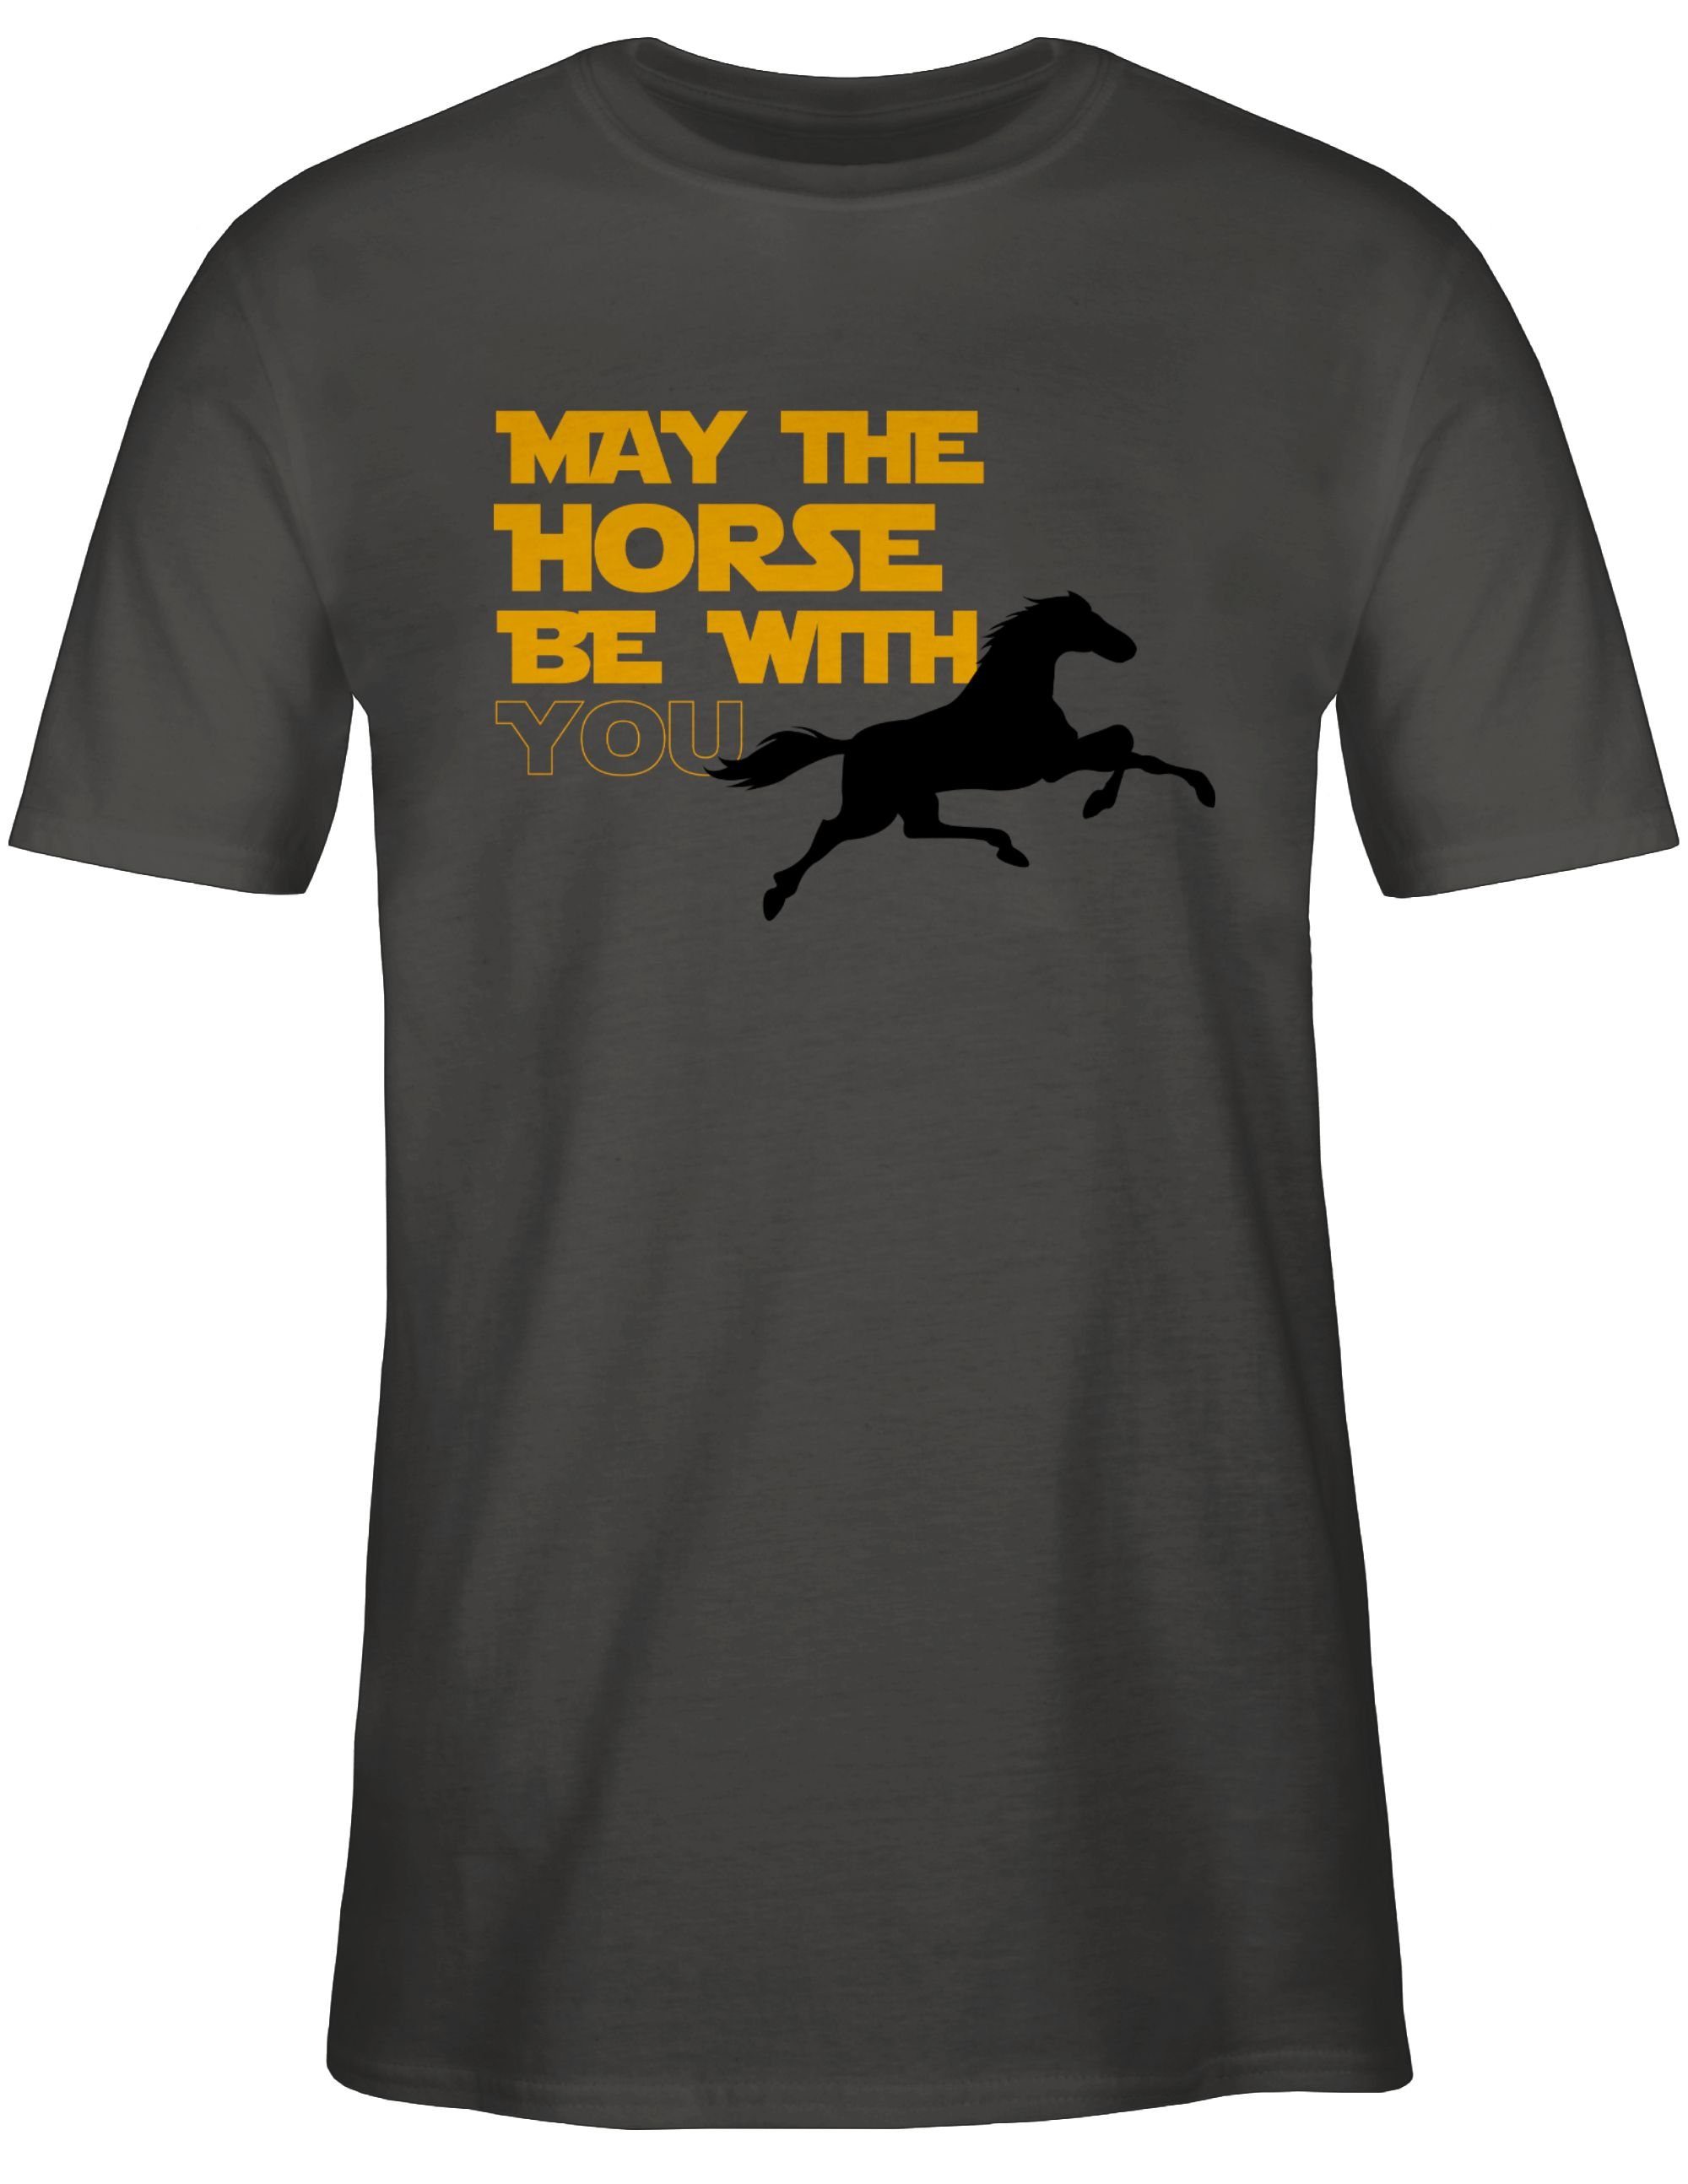 Shirtracer T-Shirt be with Pferd May the you Dunkelgrau horse 1